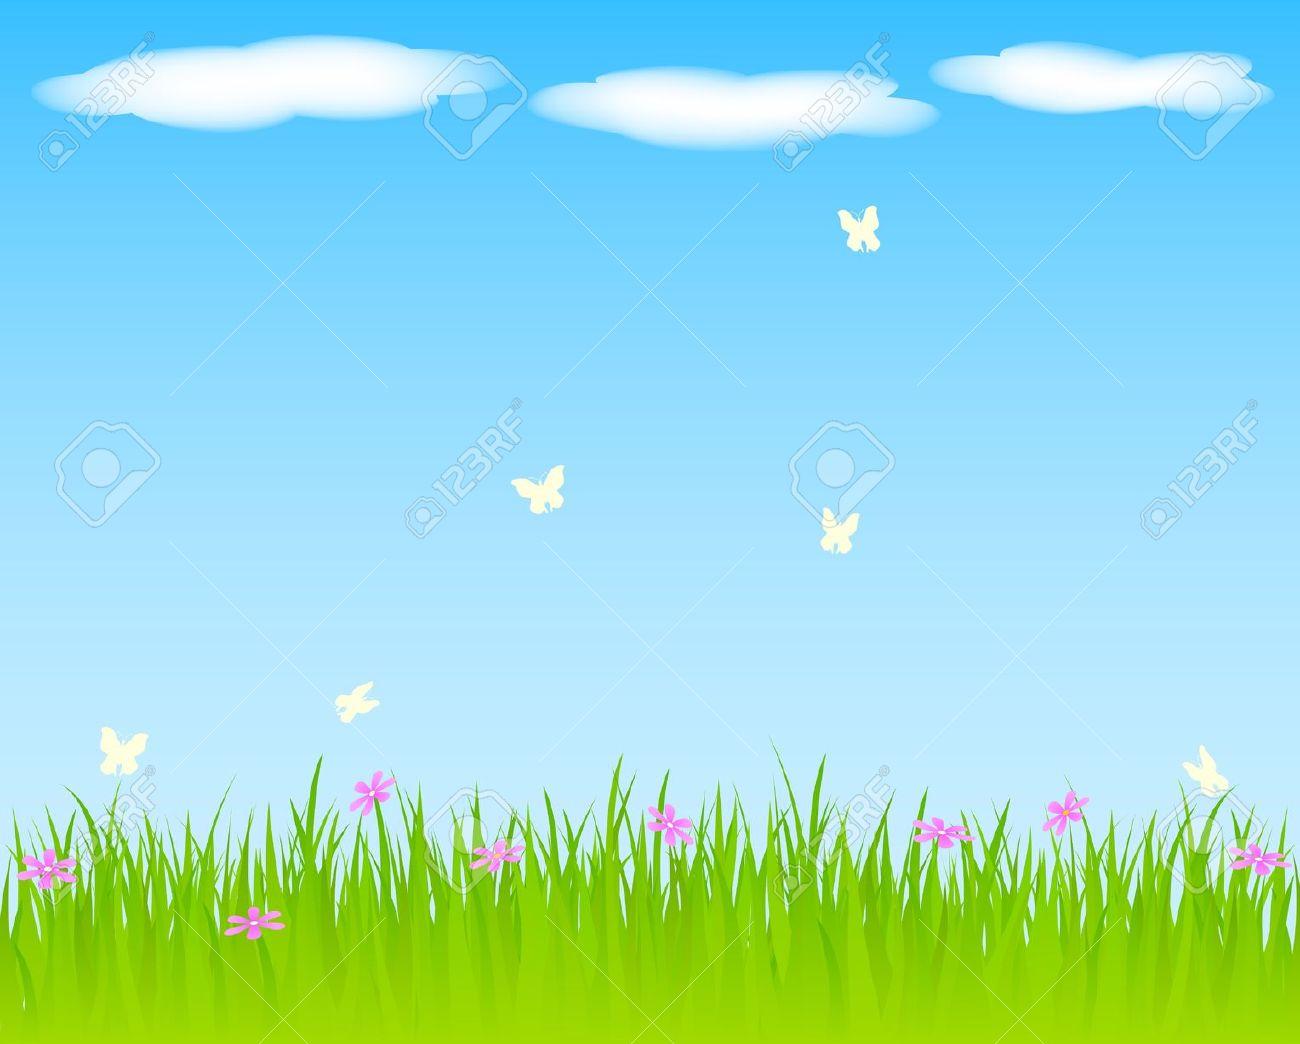 grassy field background clipart - Clip Art Library